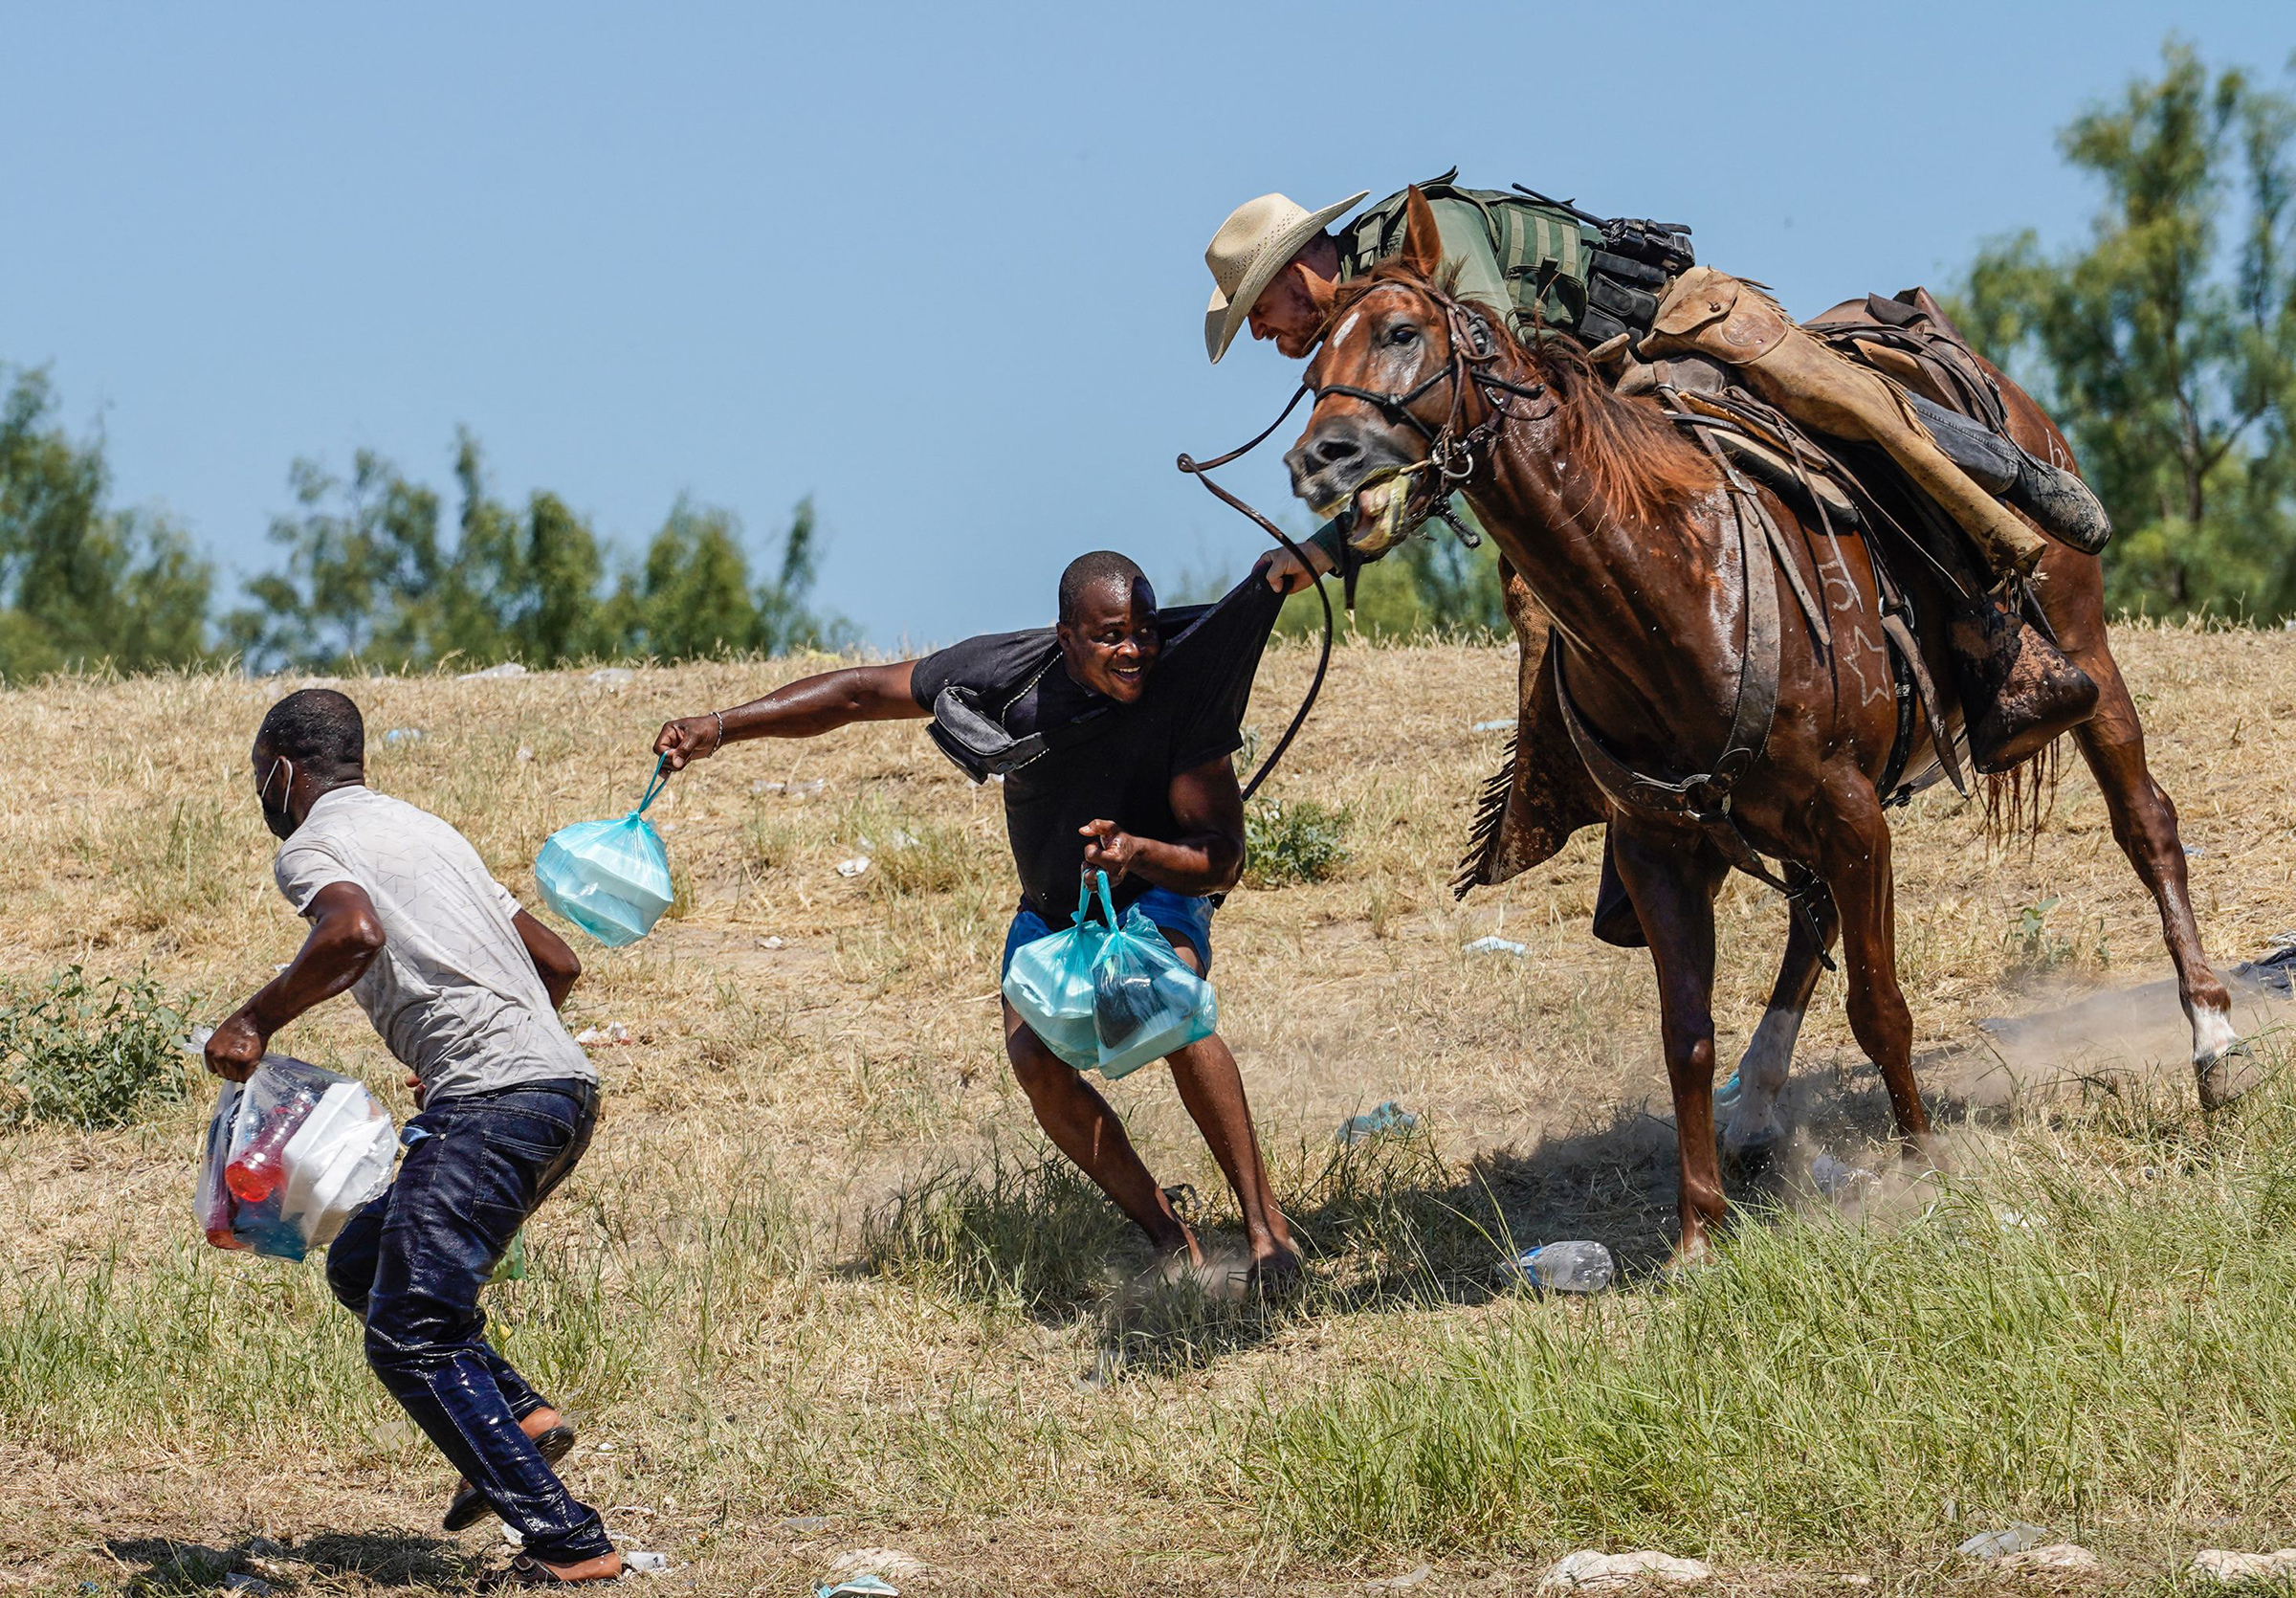 A U.S. Border Patrol agent grabs the shirt of a Haitian man while trying to stop migrants at the U.S.-Mexico border from crossing into Texas, on Sept. 19. Images of mounted agents chasing migrants and brandishing whiplike reins prompted the White House to label the scenes “horrific.” The Department of Homeland Security is investigating. (Paul Ratje—AFP/Getty Images)